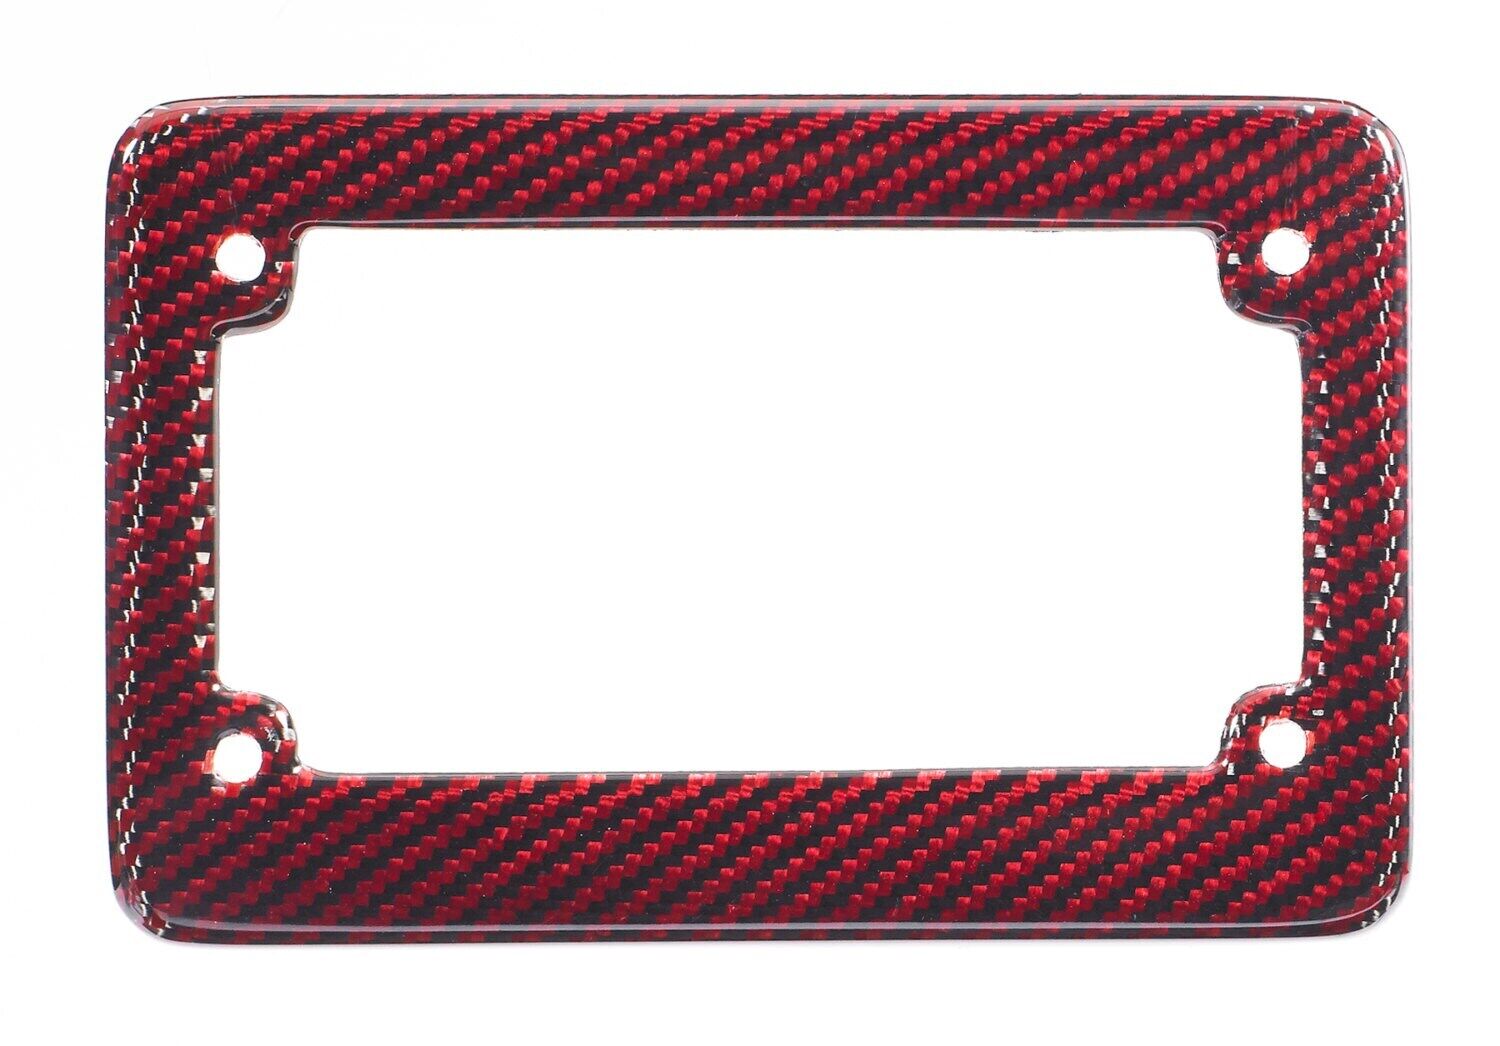 Real 100% Red Carbon Fiber Motorcycle License Plate Frame With Free Caps